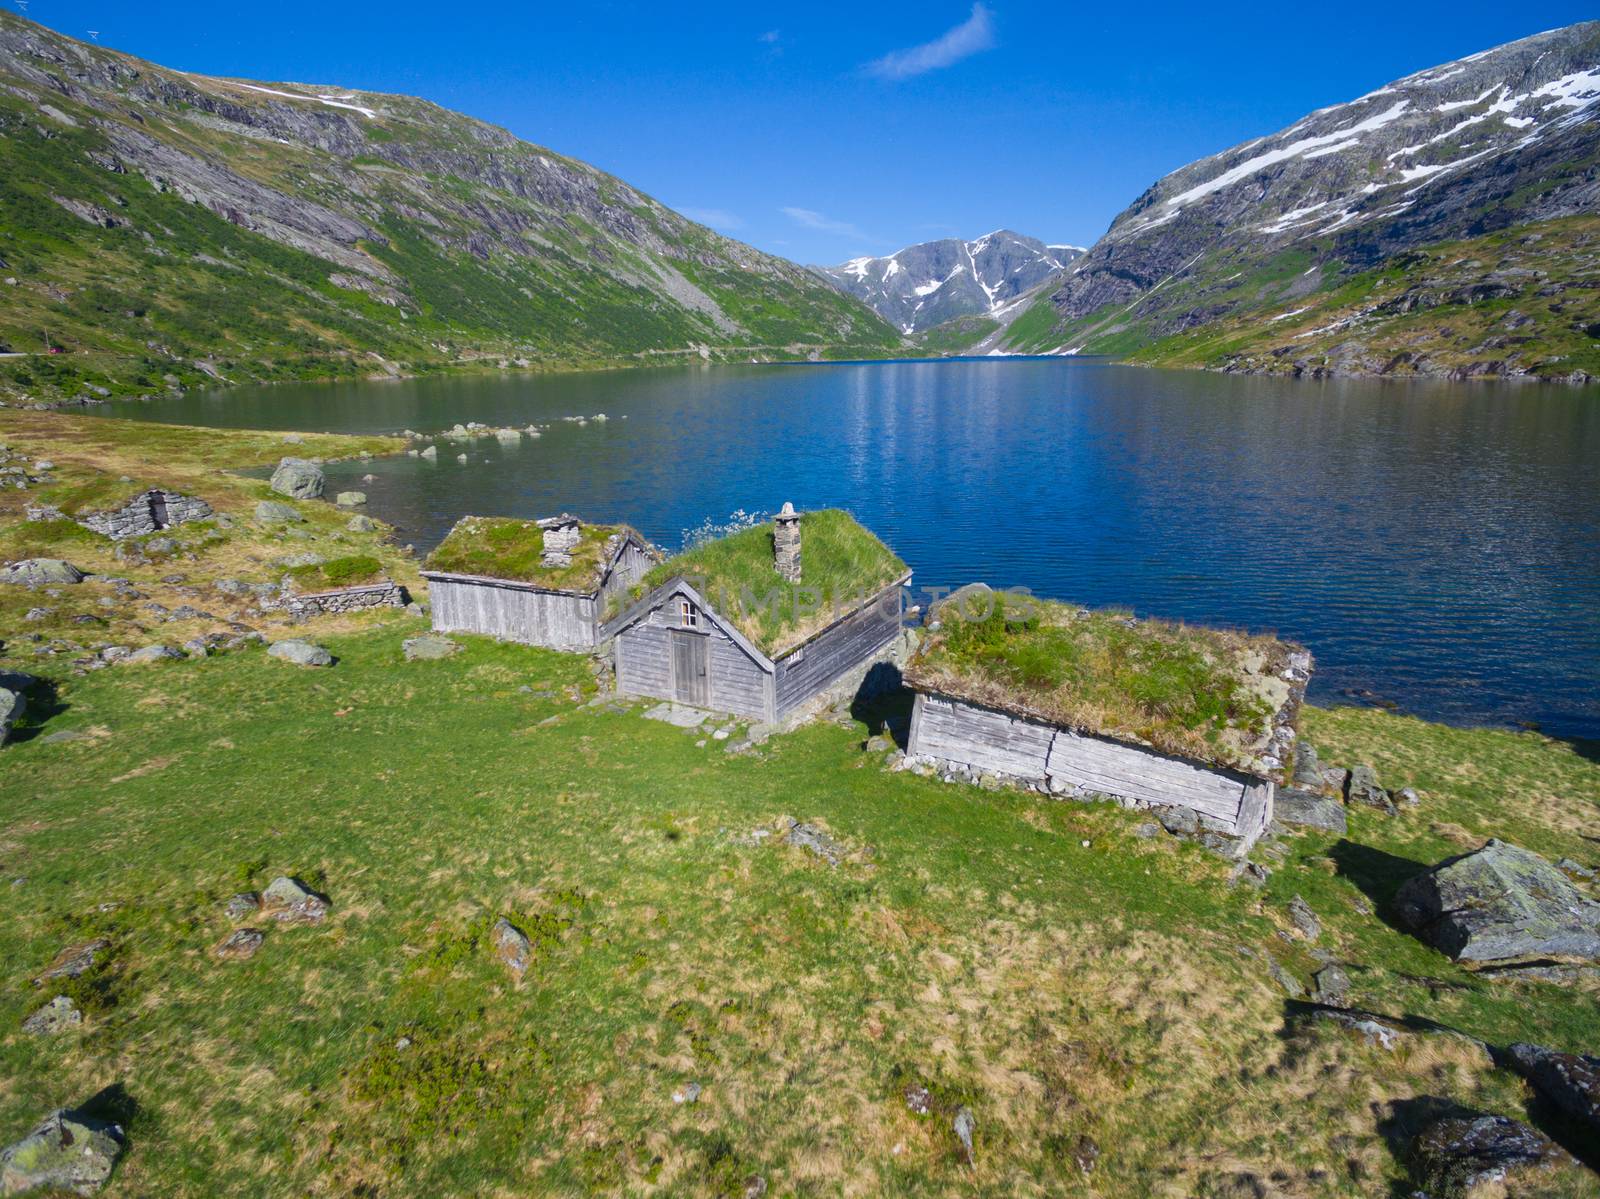 Traditional norwegian huts by Harvepino